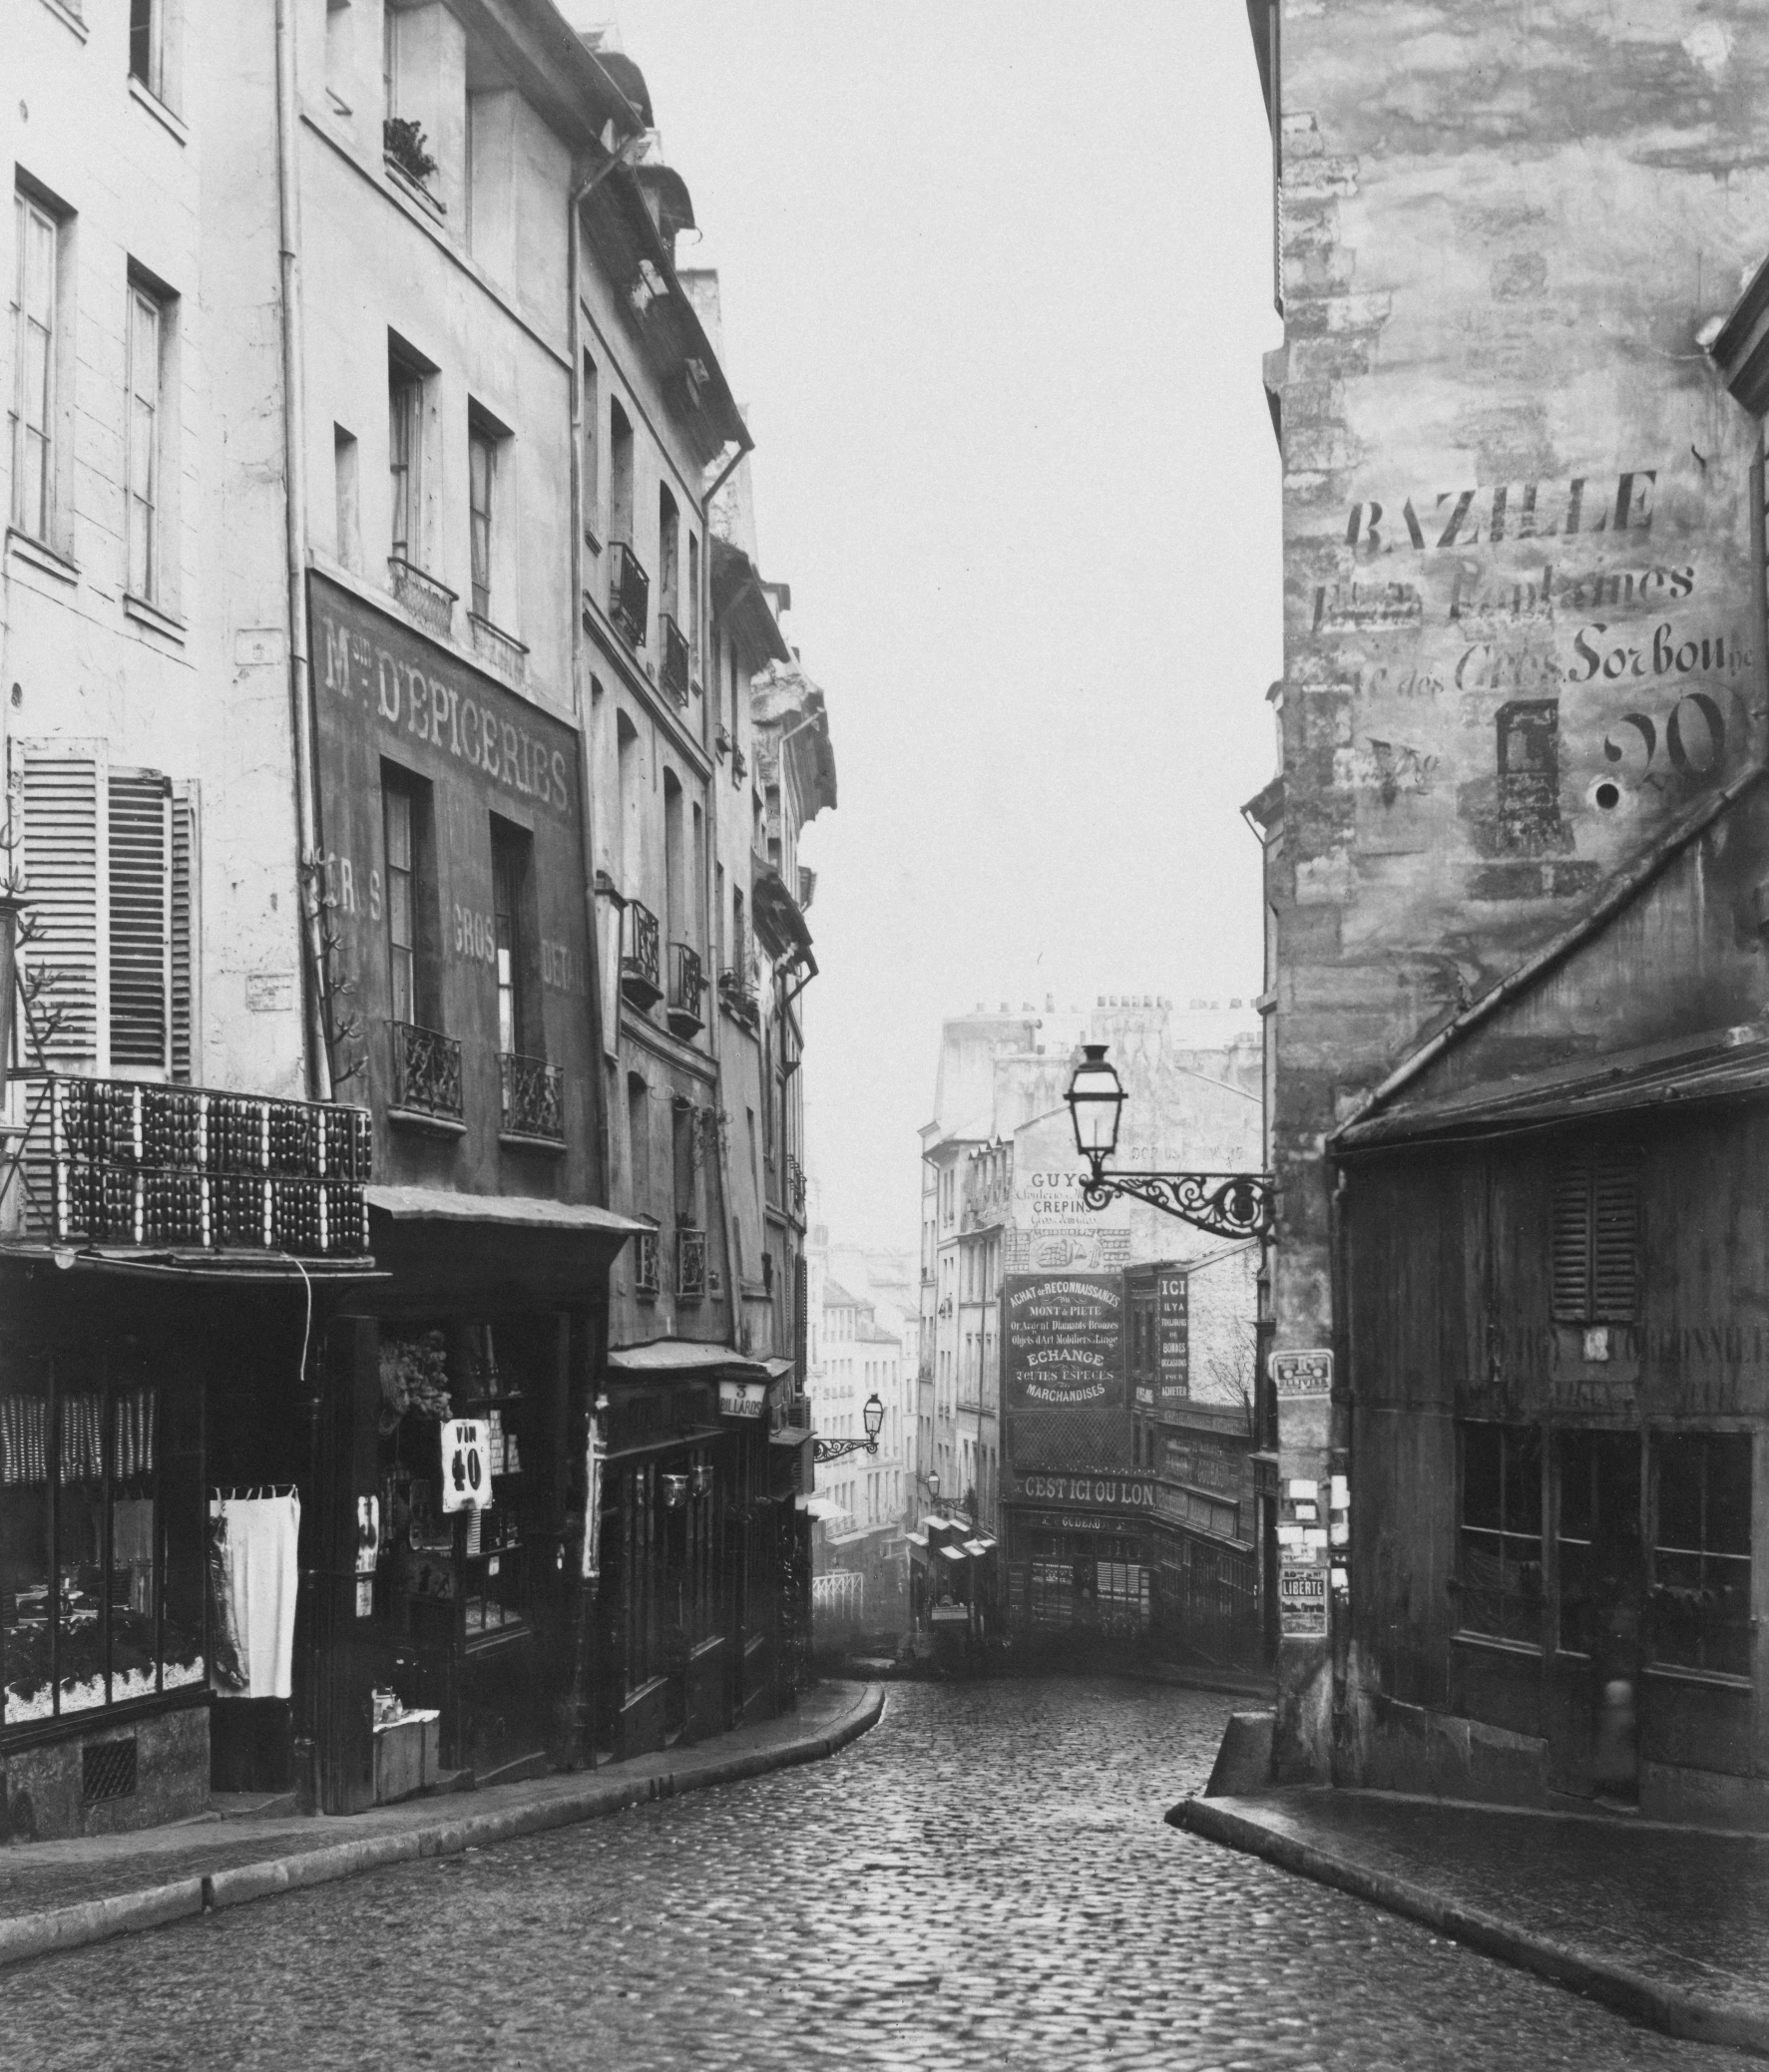 an old black and white picture shows narrow city streets